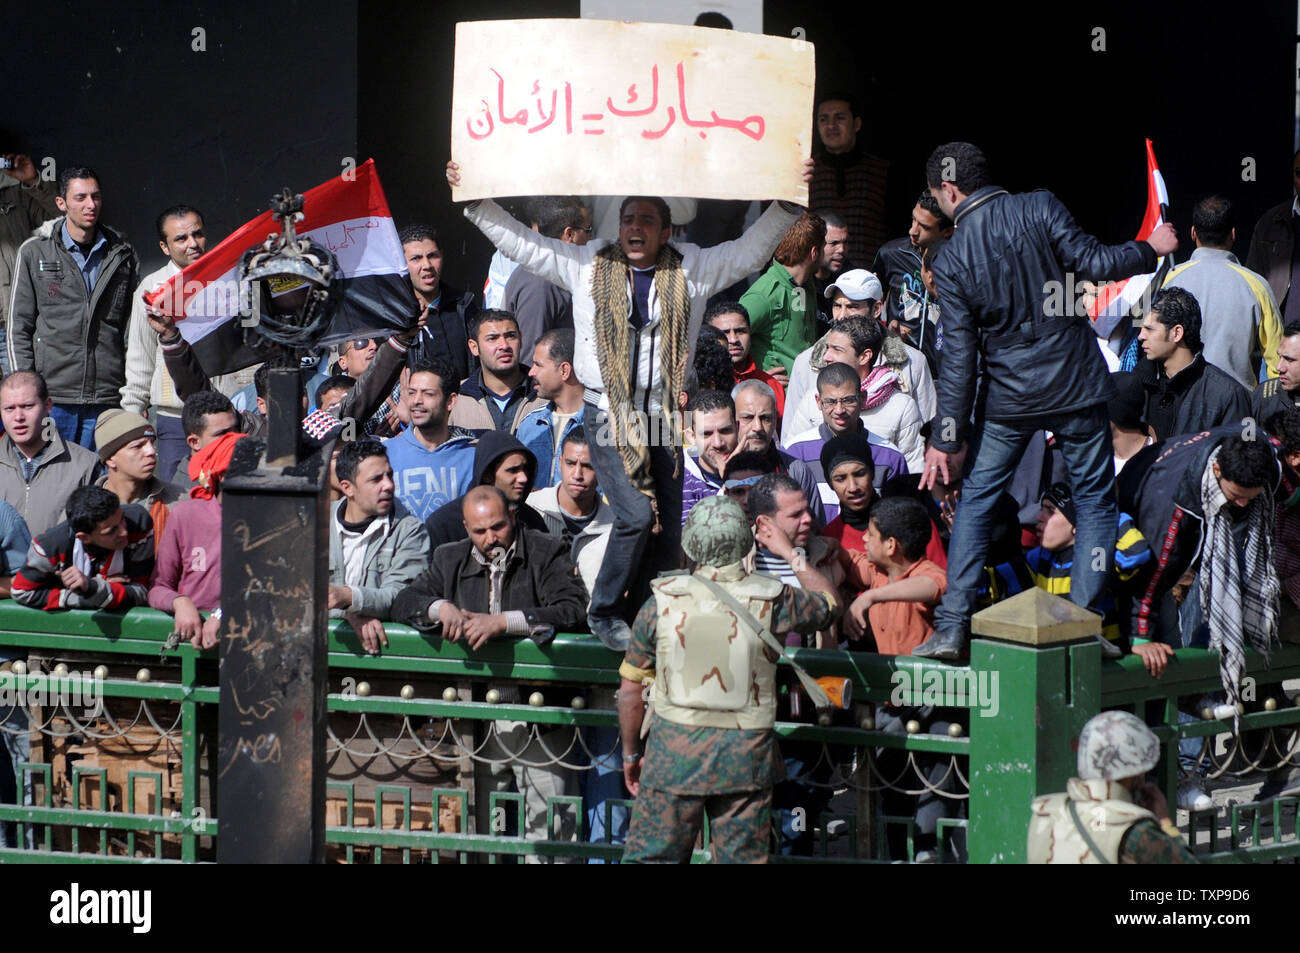 Clashes continue between anti-government demonstrators and their pro-government opponents in Cairo's Tahrir square on February 03, 2011. This is the 10th day of protests calling for the ouster of embattled President Hosni Mubarak.  UPI Stock Photo